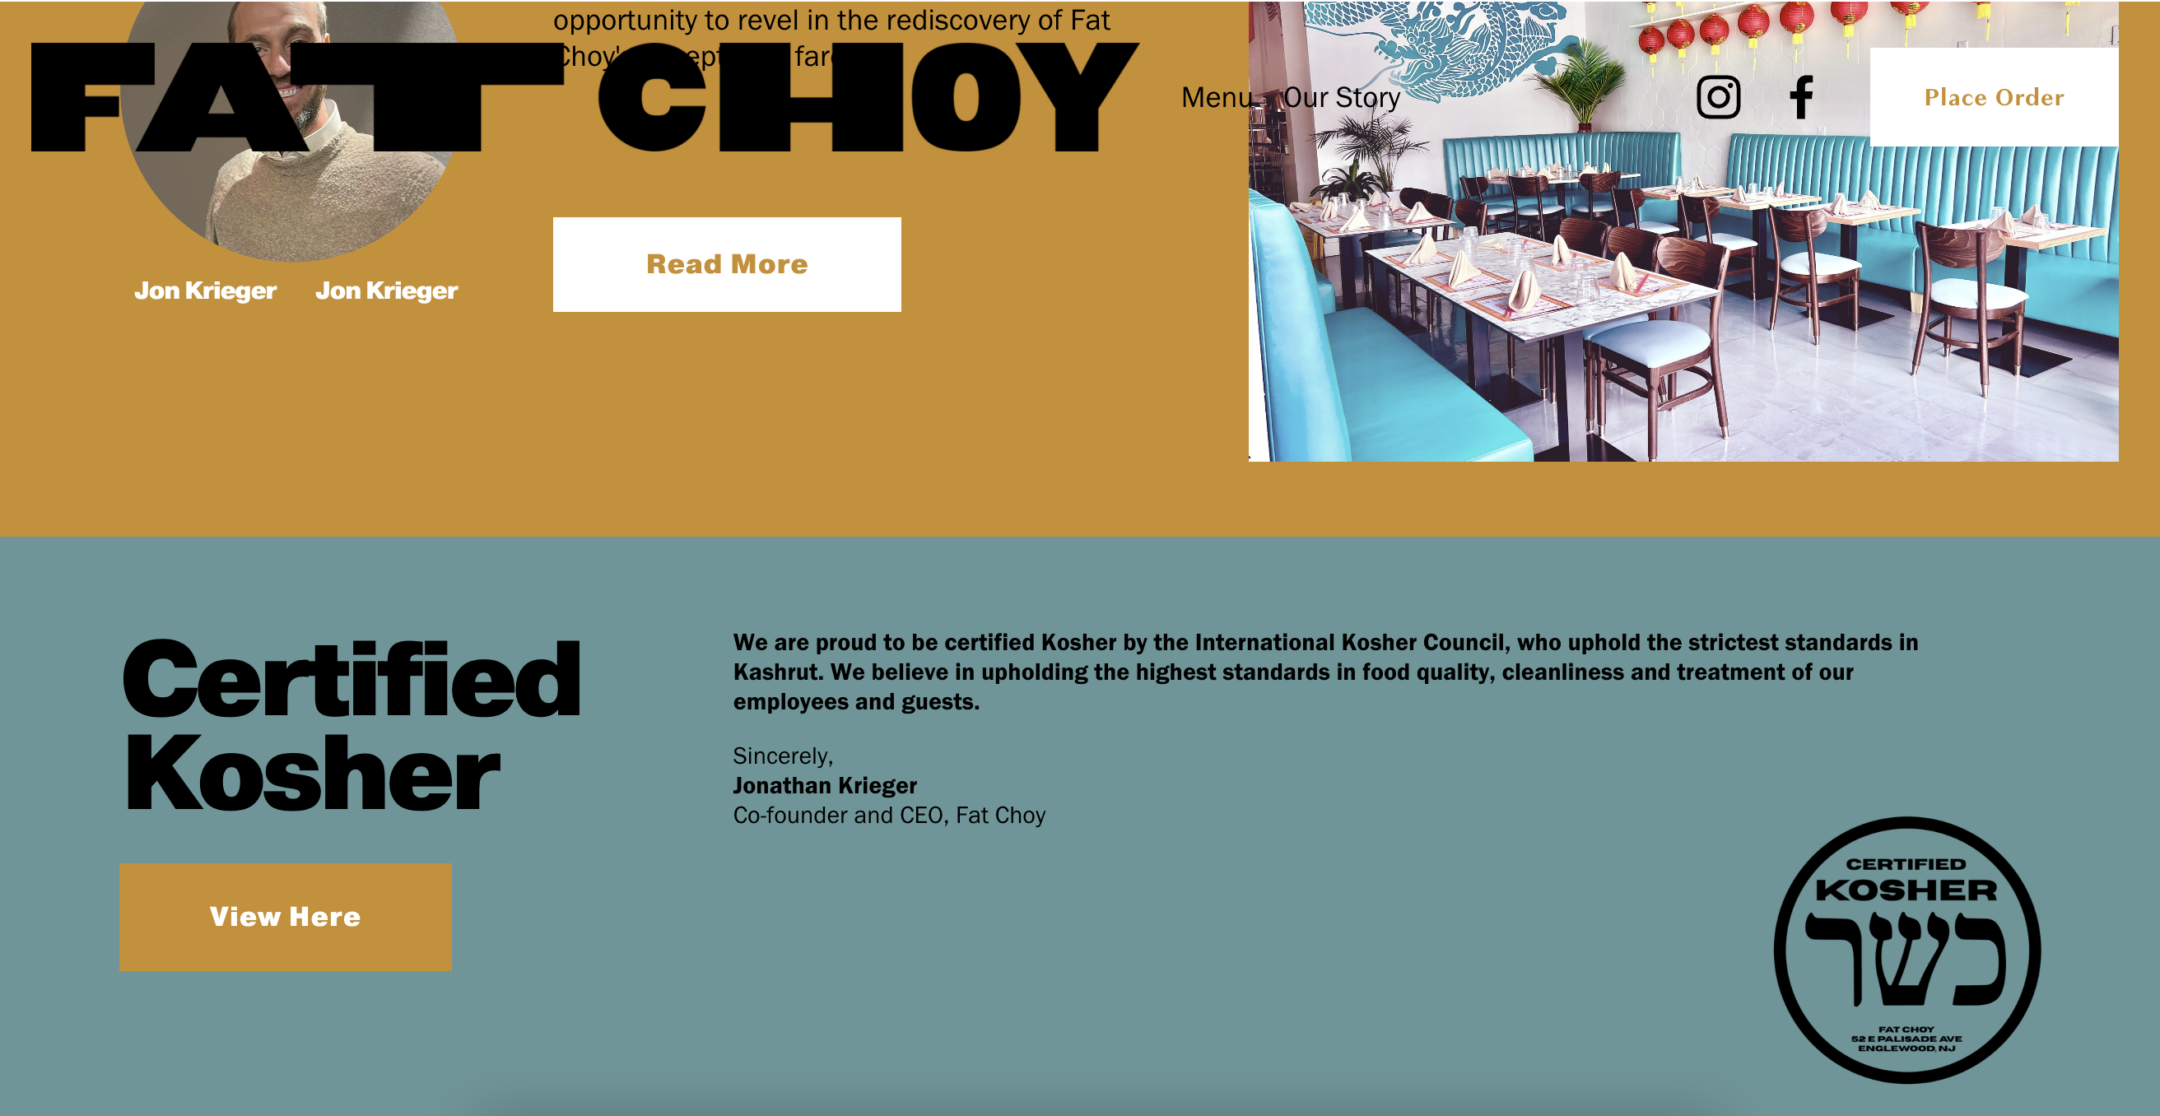 Fat Choy’s website prominently displays information about its kosher certification. (Screenshot)